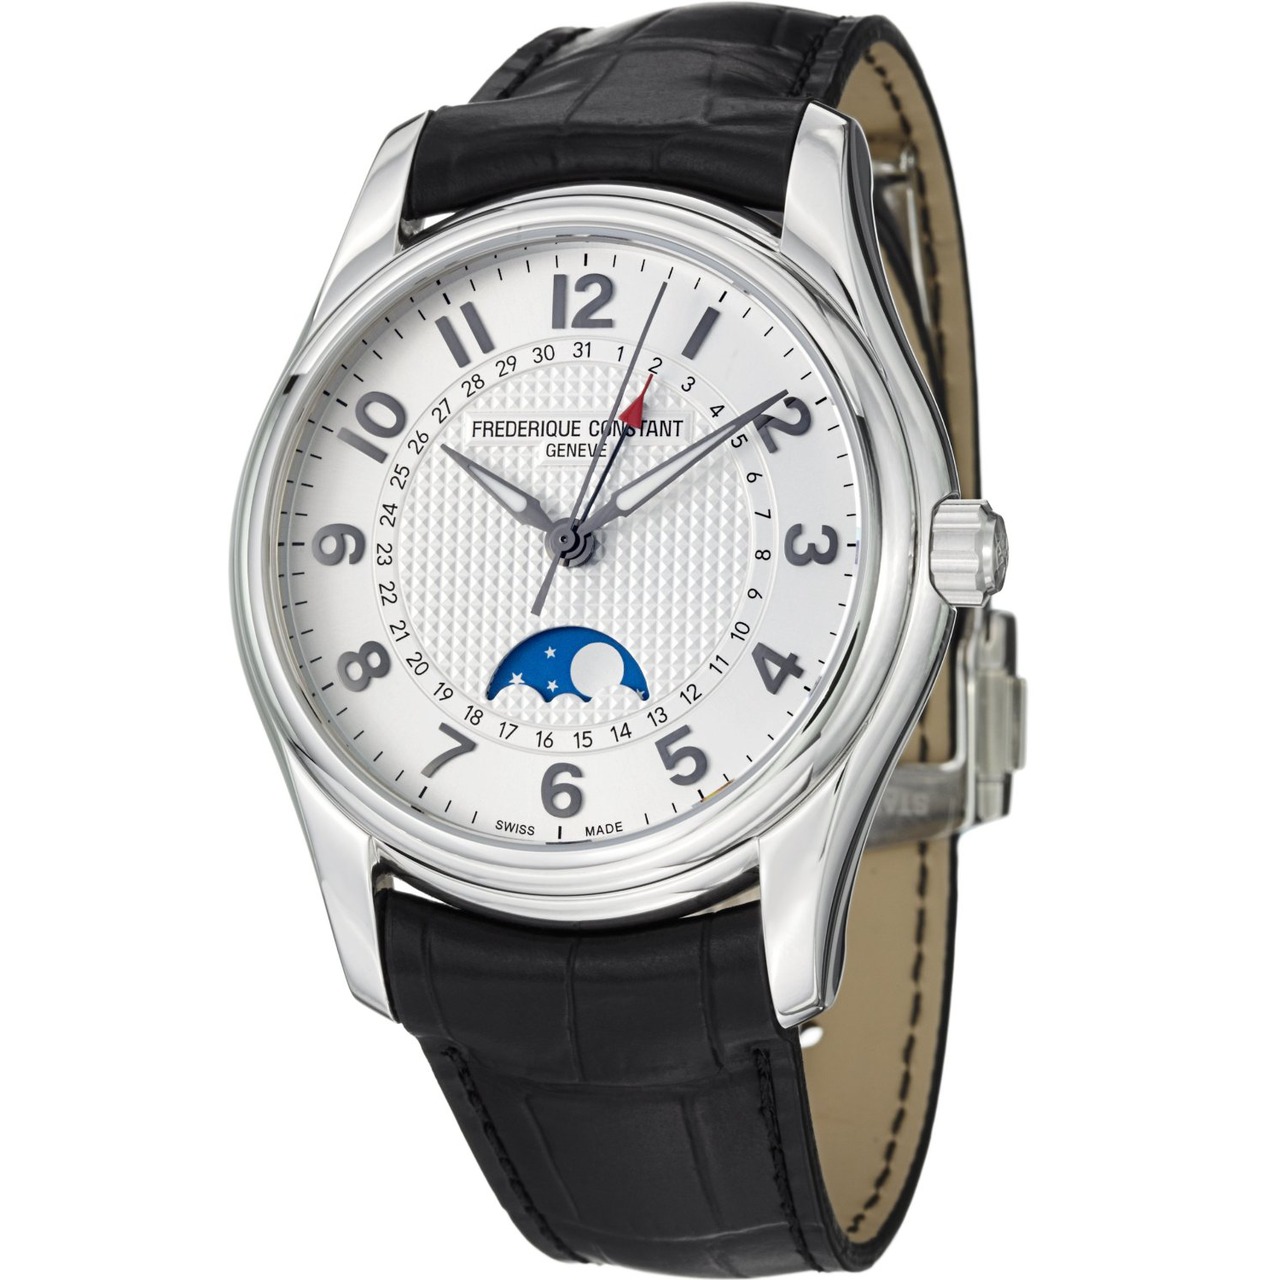 Frederique Constant Run About Mens Watch FC-330RM6B6